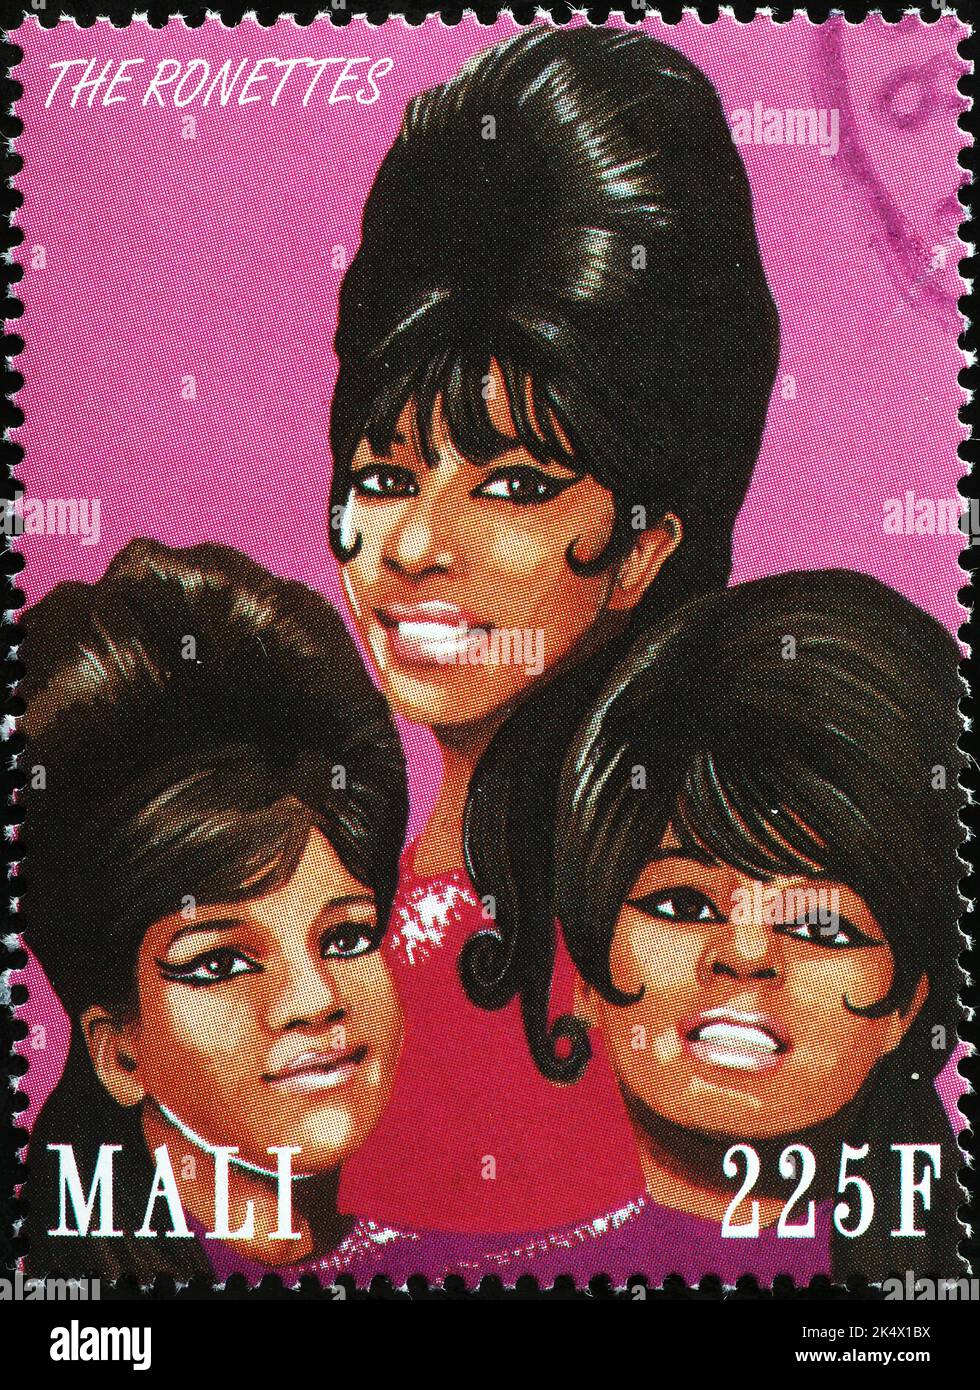 The Ronettes on postage stamp if Mali Stock Photo